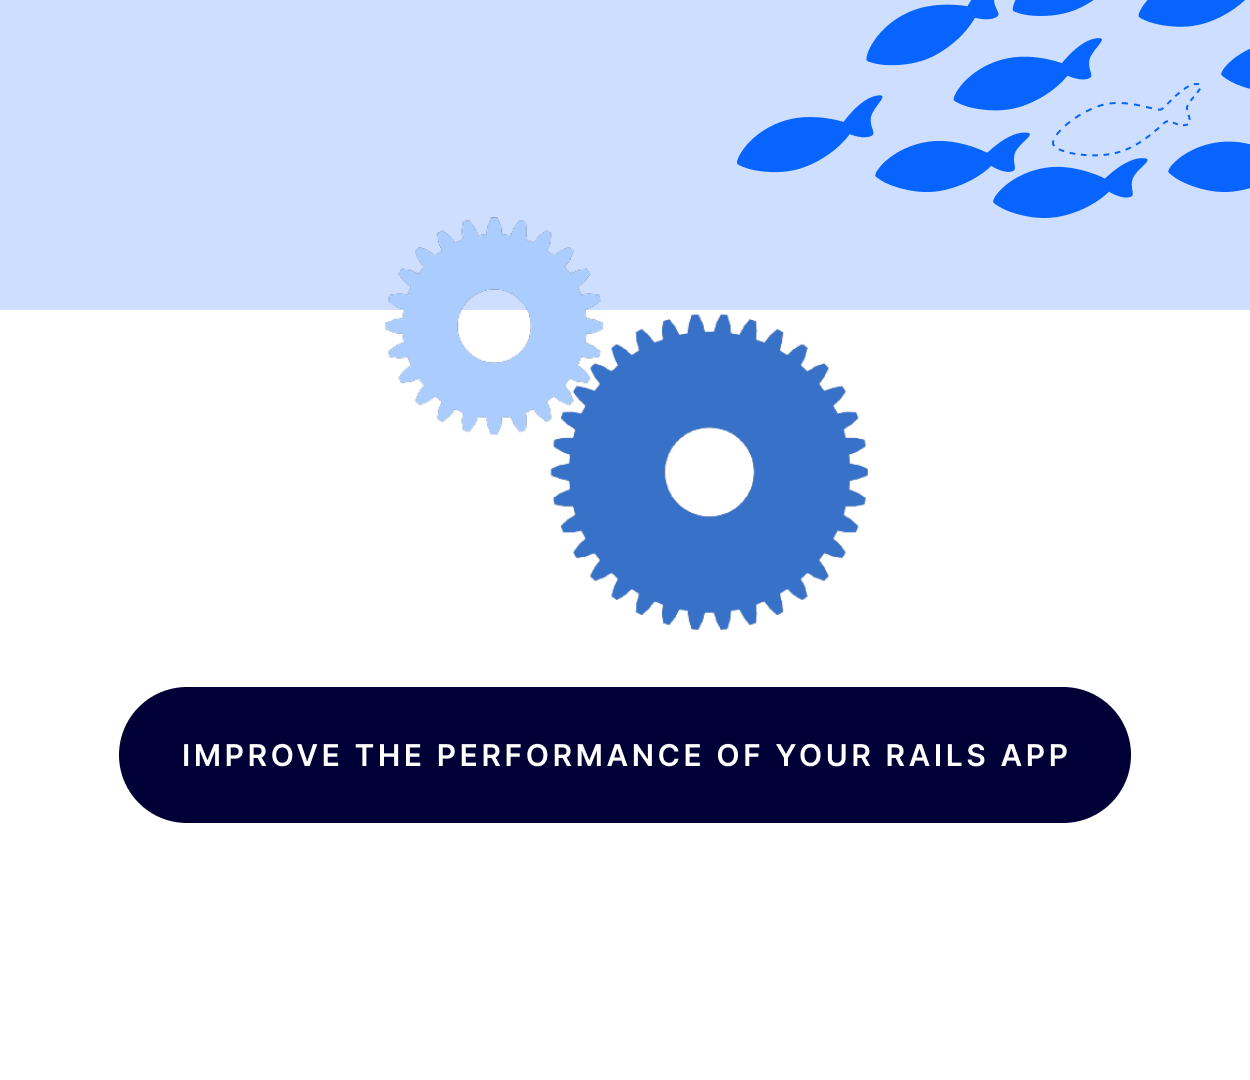 Improving the performance of your Rails app